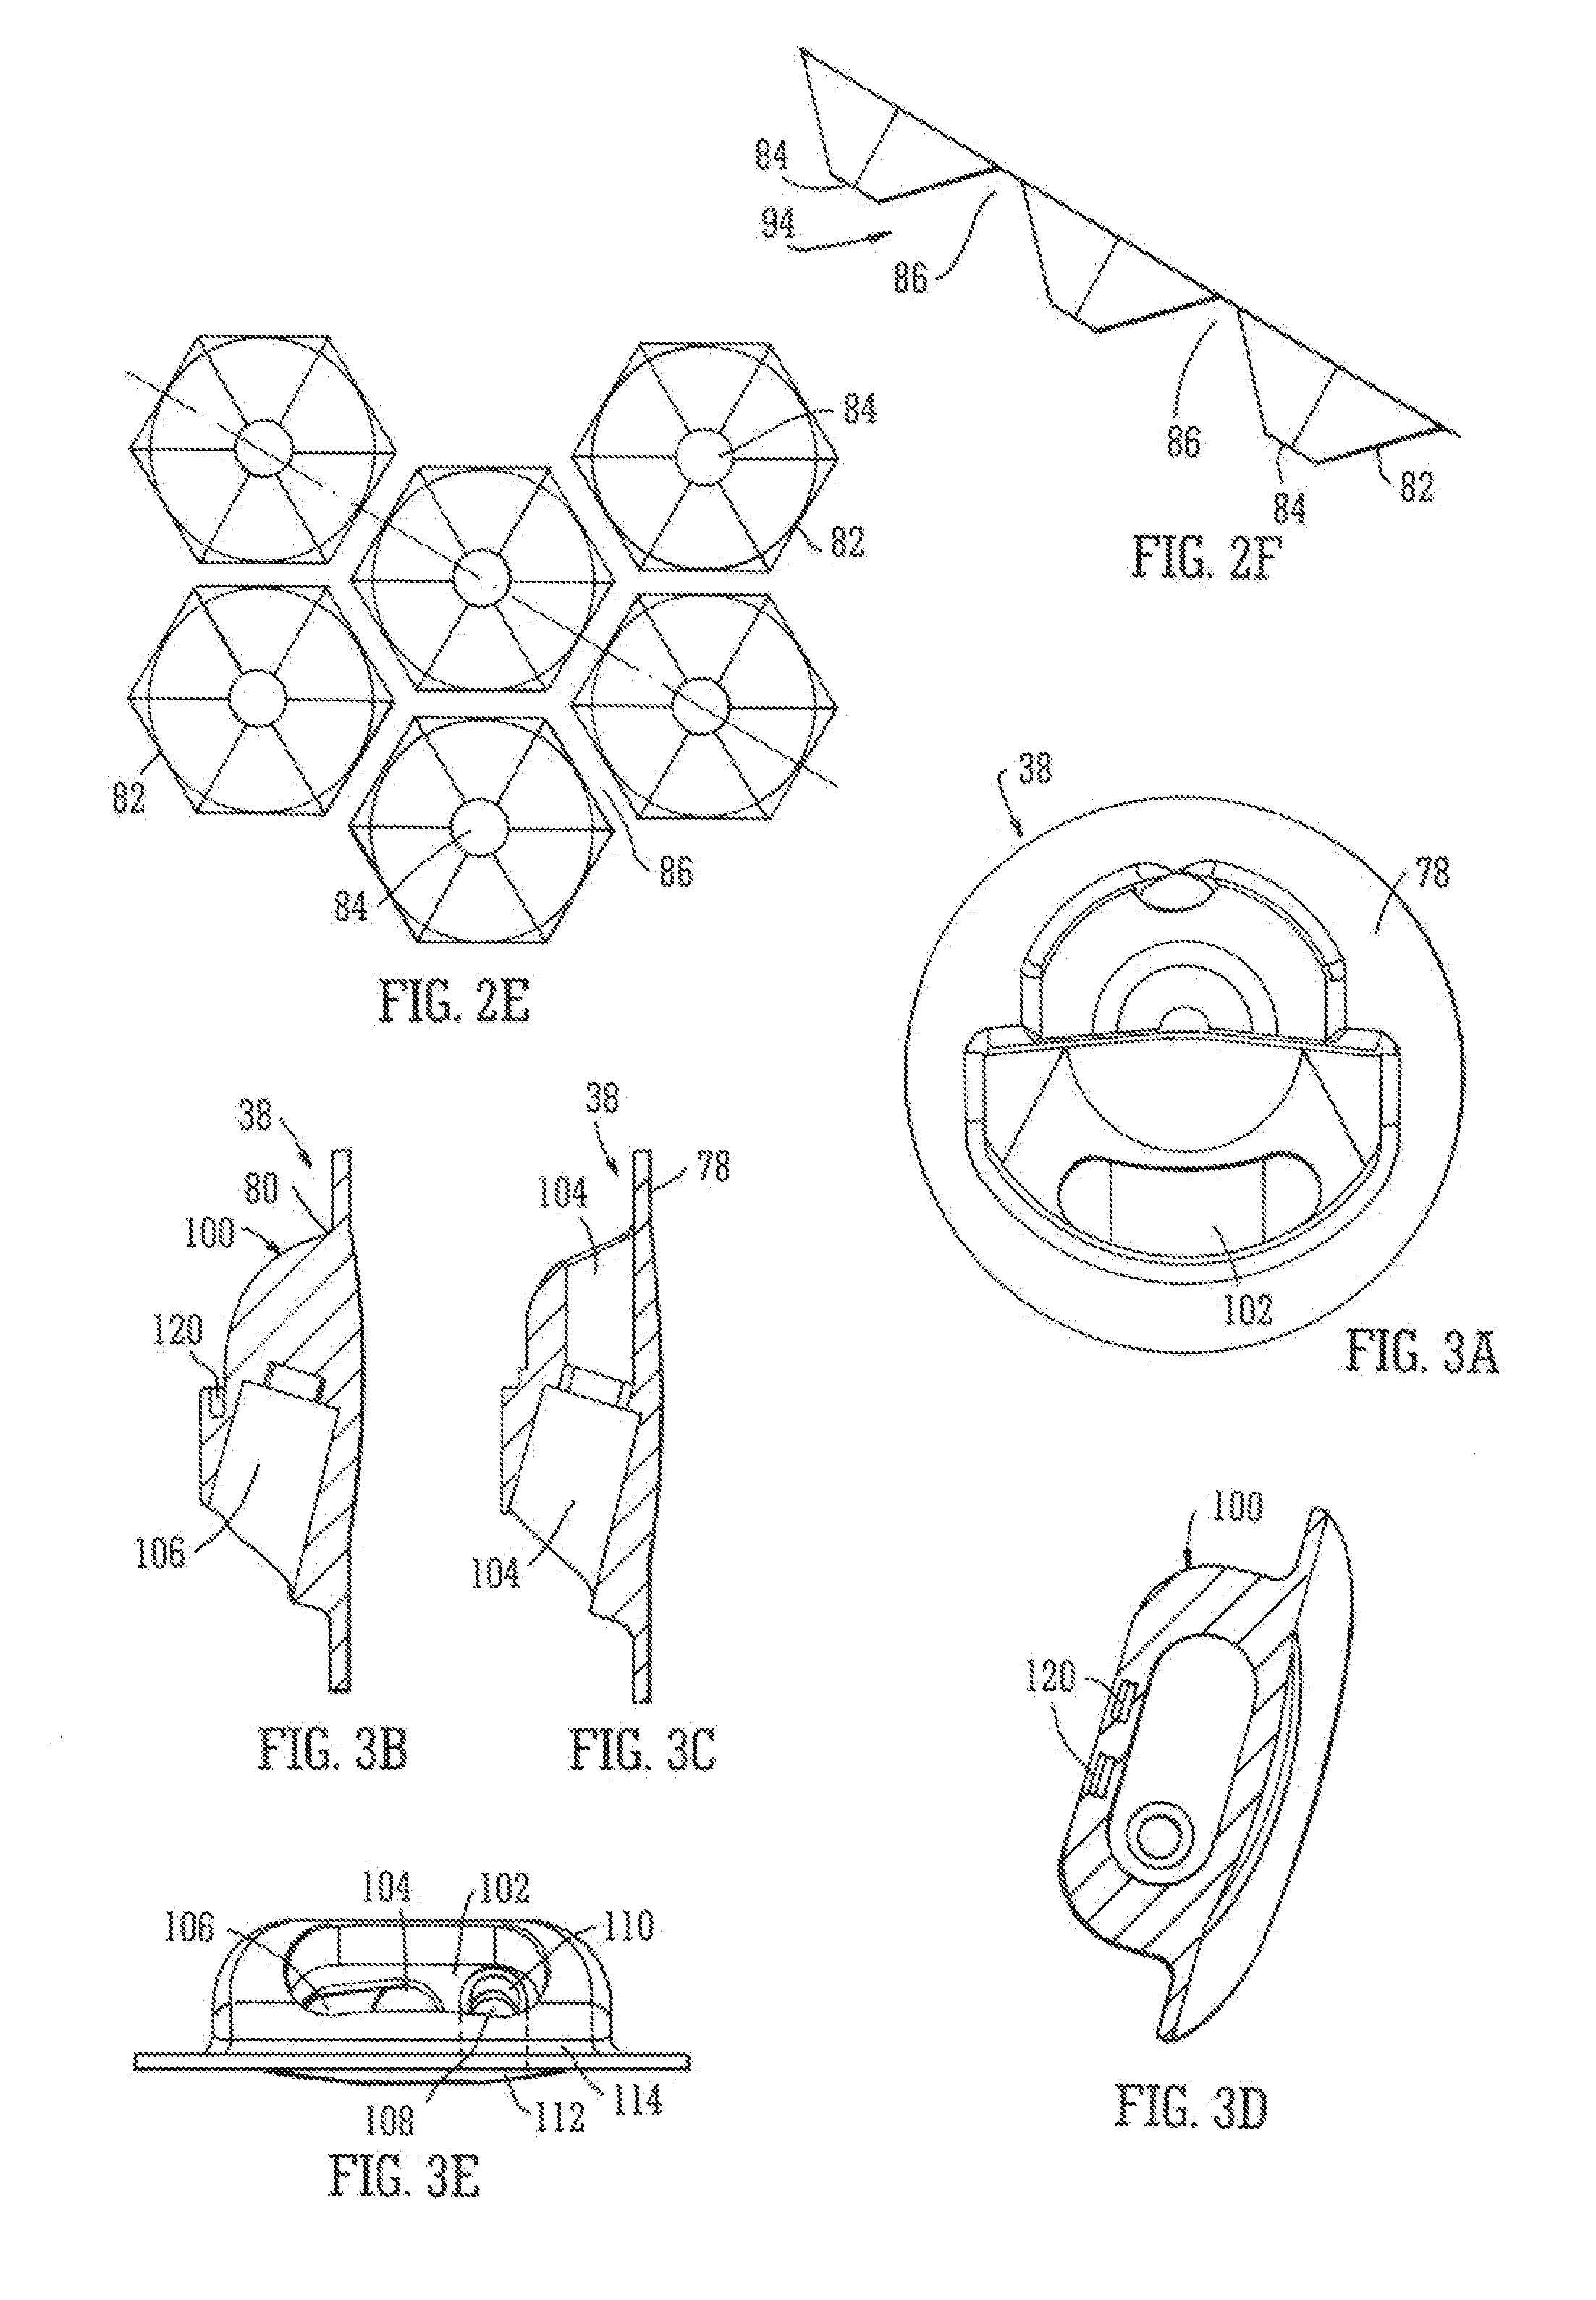 Wound filling apparatuses and methods